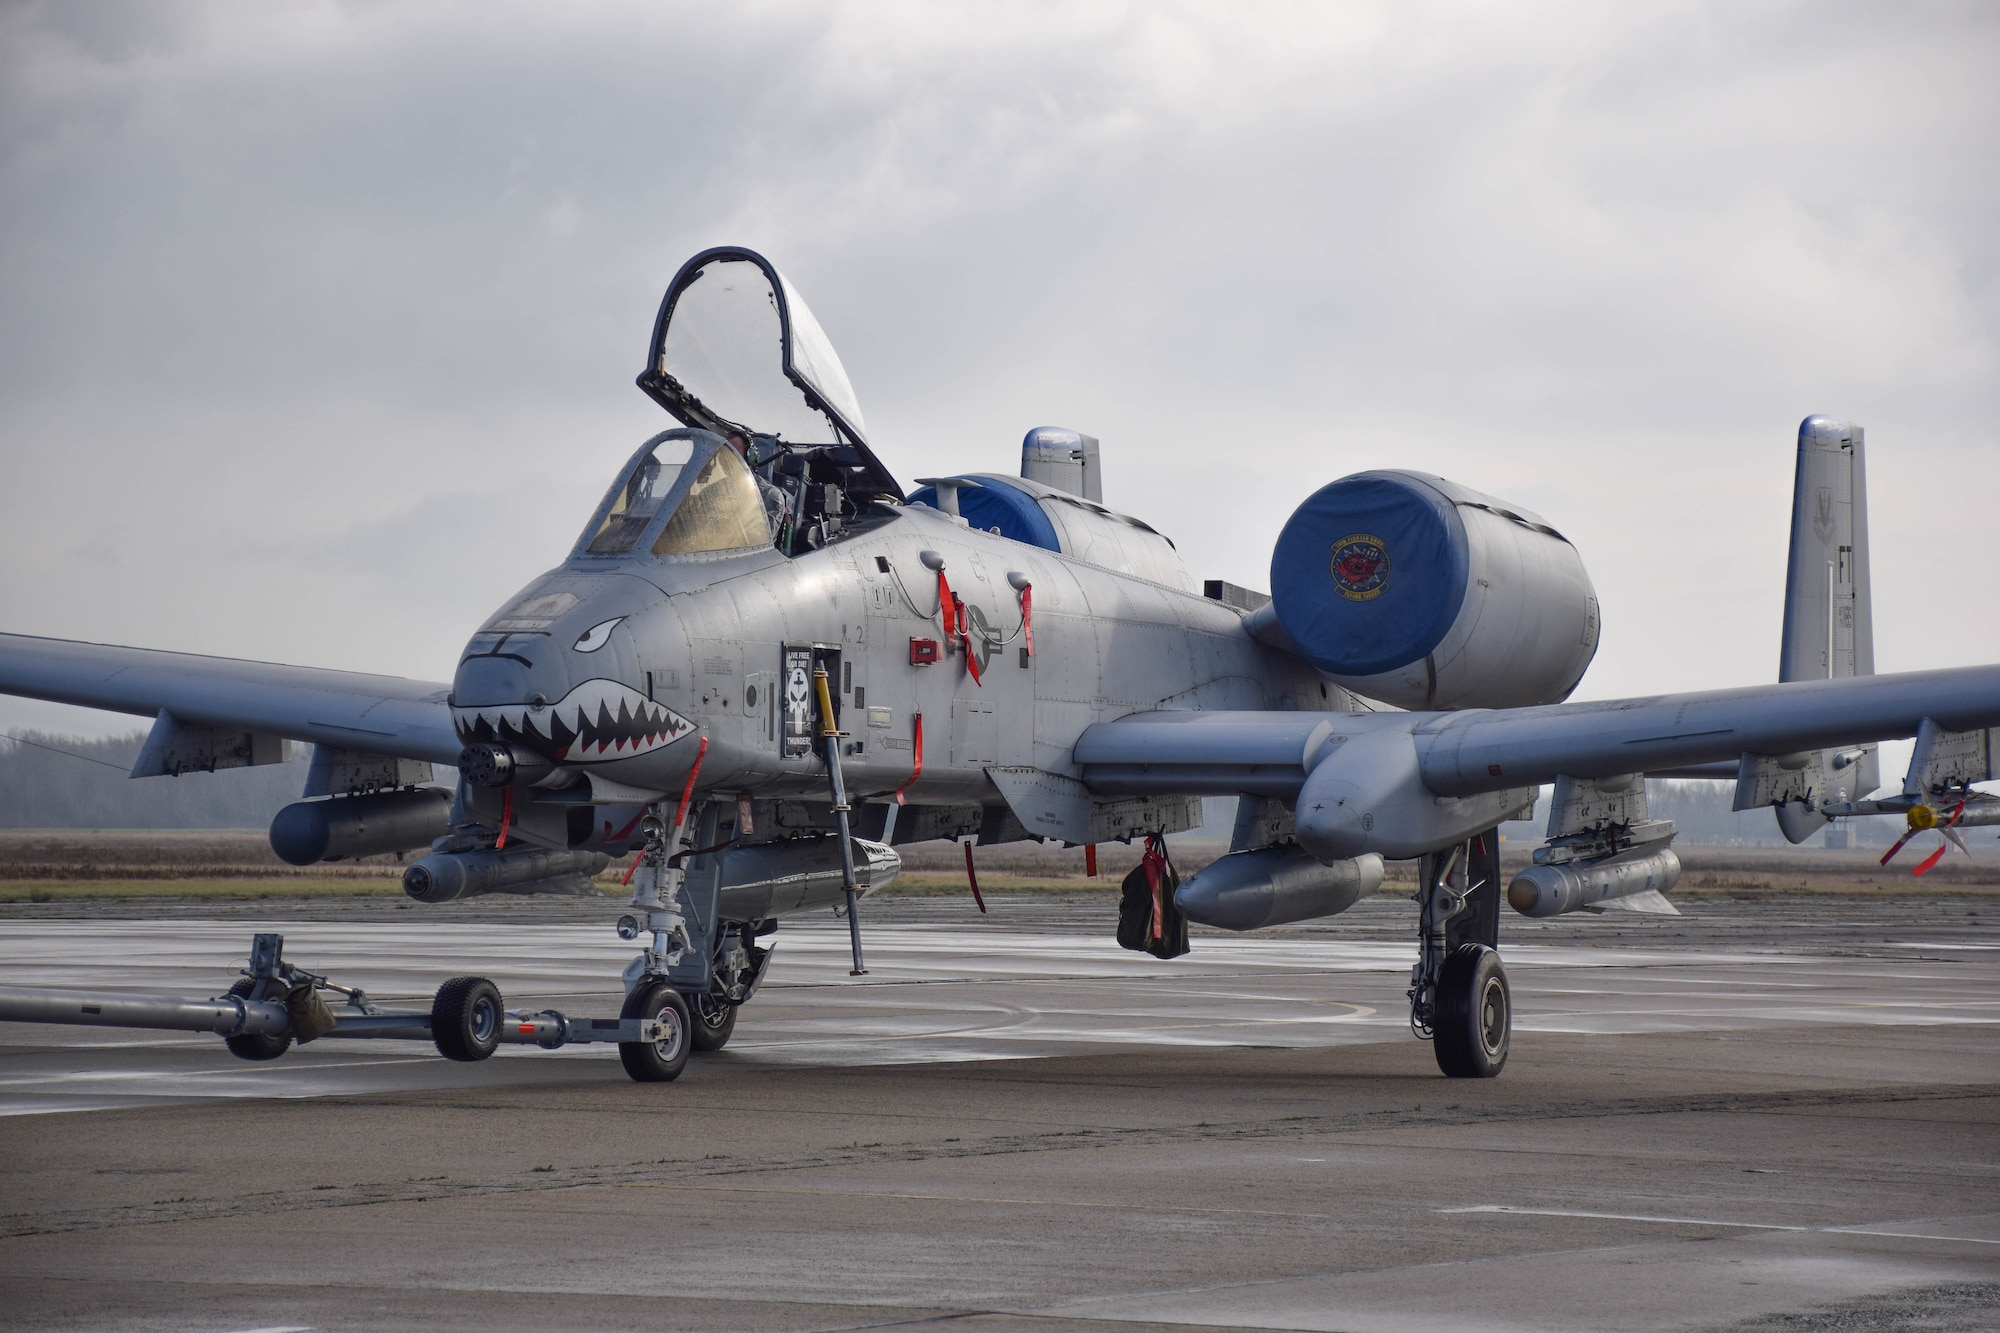 An A-10C Thunderbolt II from the 74th Expeditionary Fighter Squadron is parked on the ramp prior to a training flight at Papa Air Base, Hungary, Dec 2, where it is currently participating in a micro-deployment as part of a Theater Security Package.  The purpose of the deployment is to conduct training and exercises alongside the Hungarian Air Force to increase readiness and enhance interoperability. (U.S. Air Force photo/ Capt. Lauren Ott)